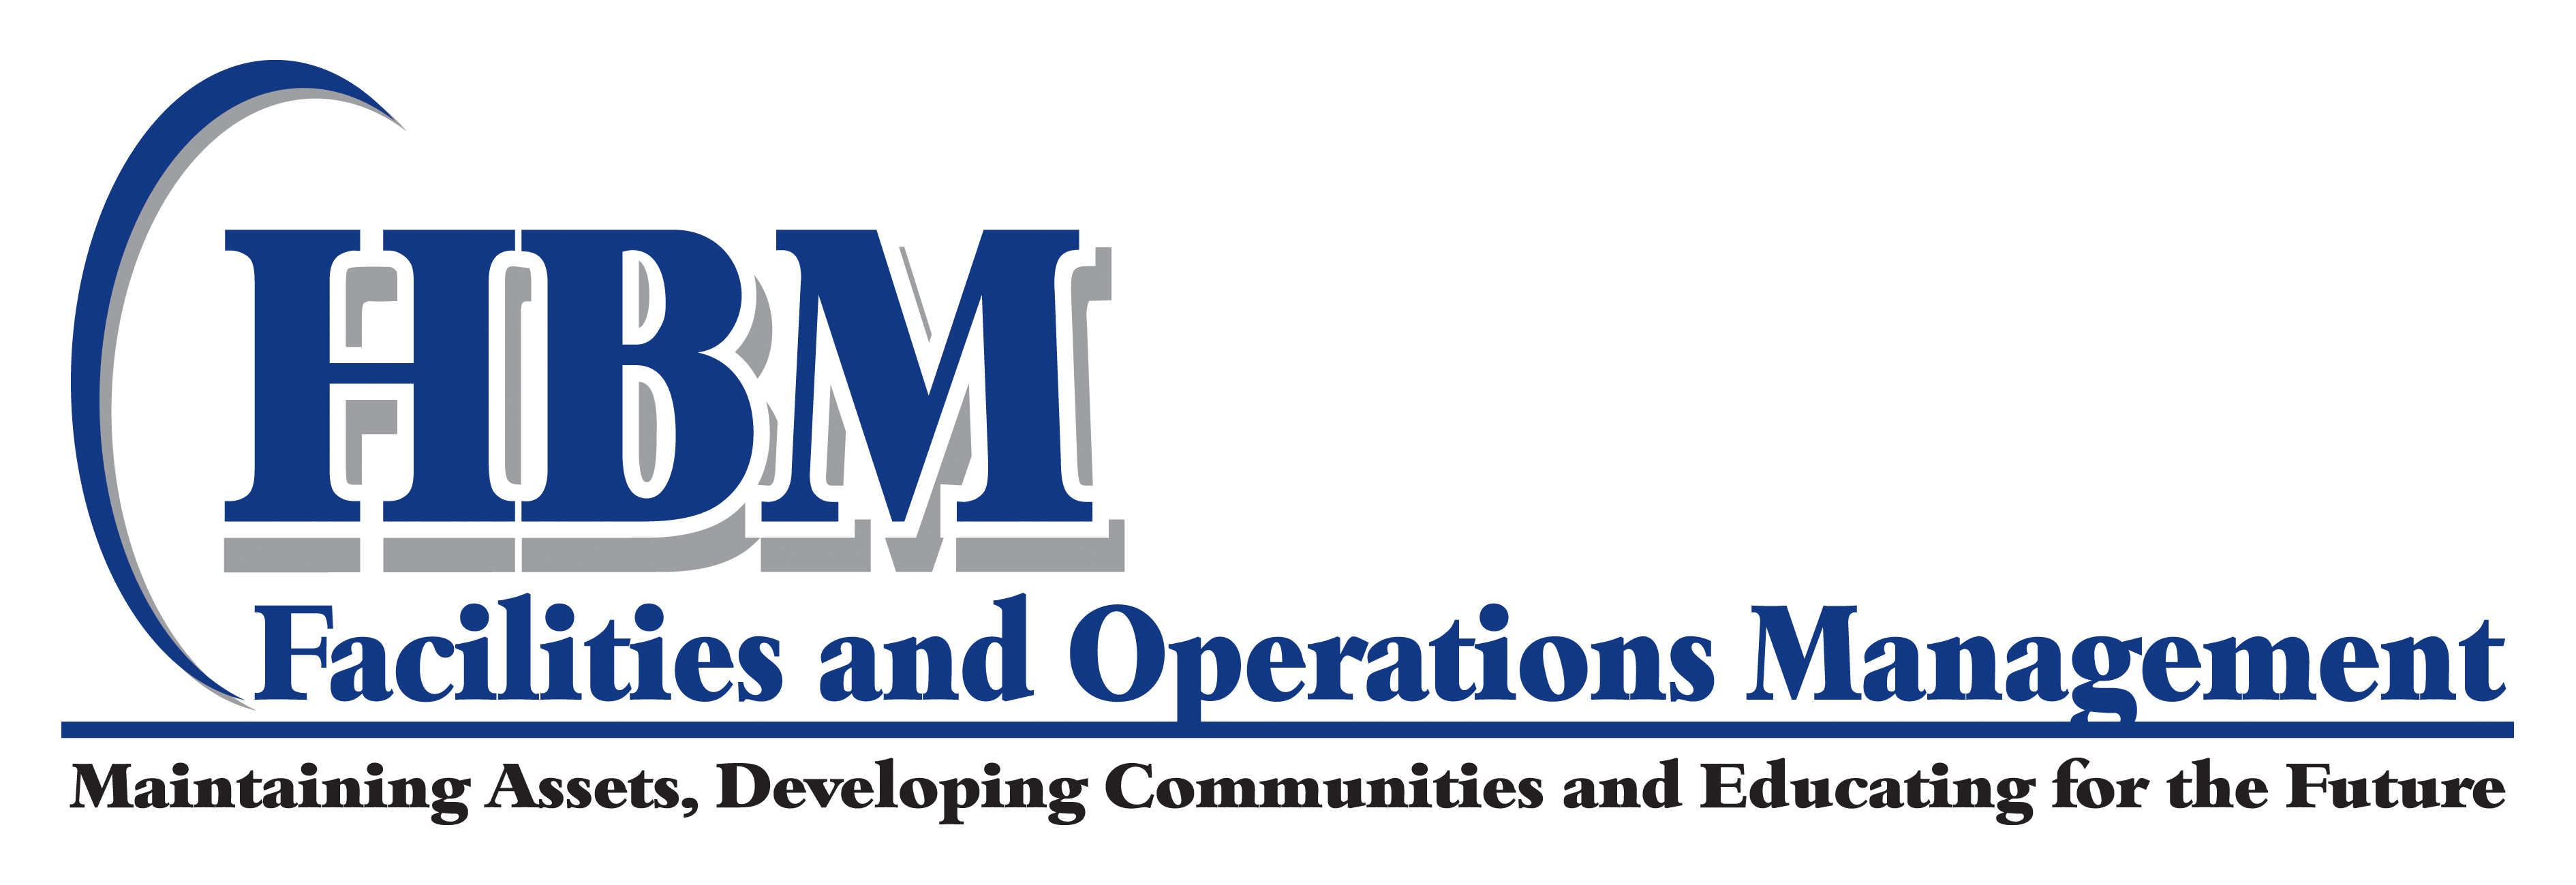 HBM Logo with tag line 